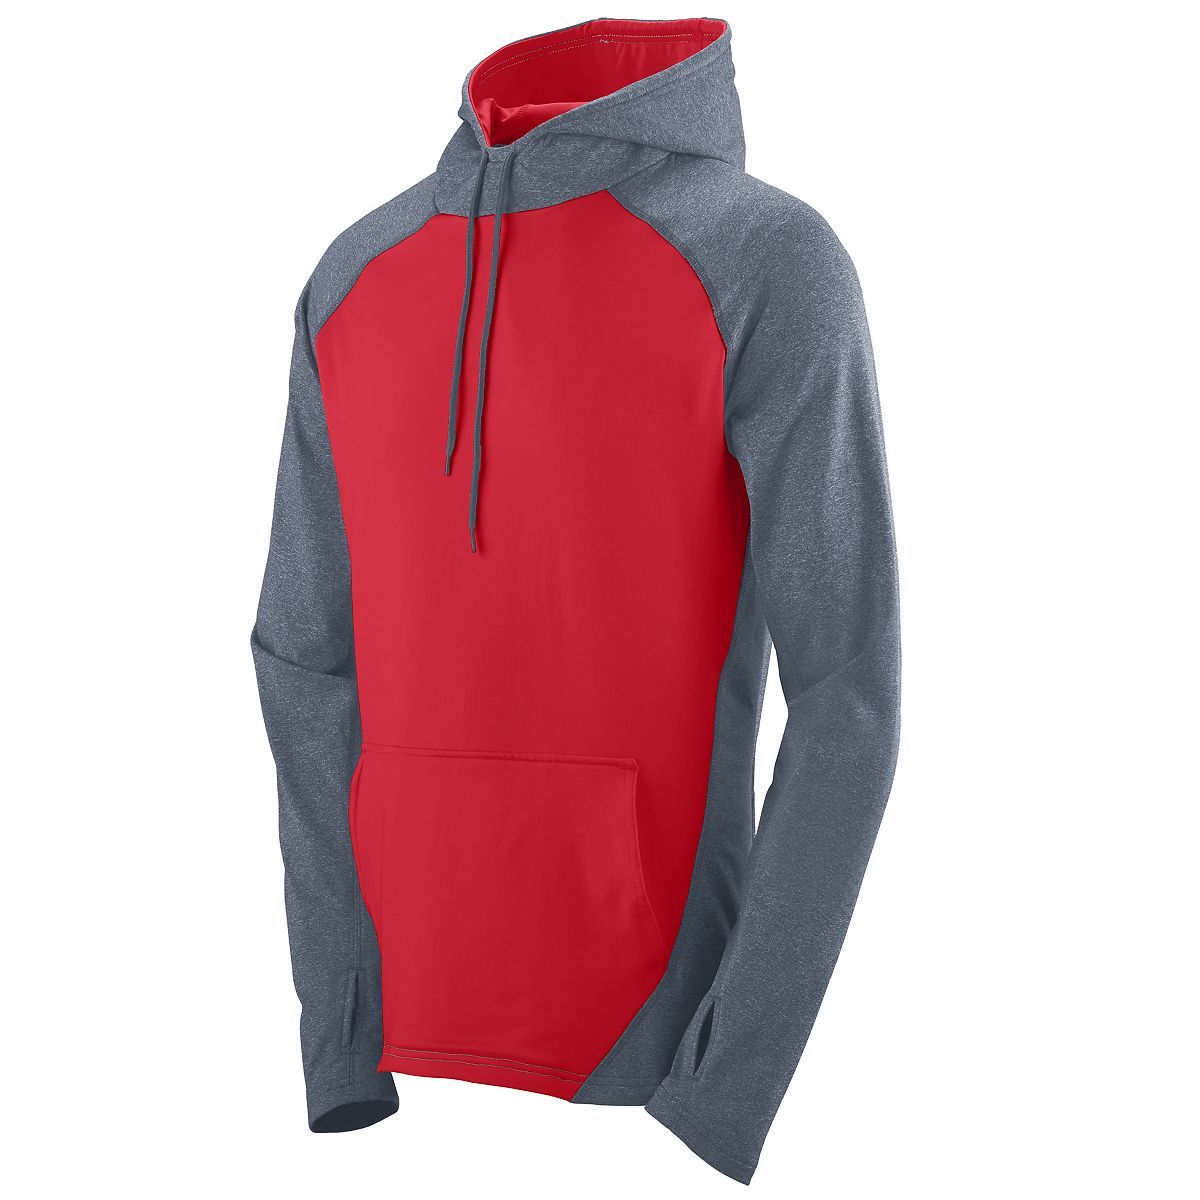 Augusta Sportswear Zeal Hoodie in Graphite Heather/Red  -Part of the Adult, Adult-Hoodie, Hoodies, Augusta-Products product lines at KanaleyCreations.com